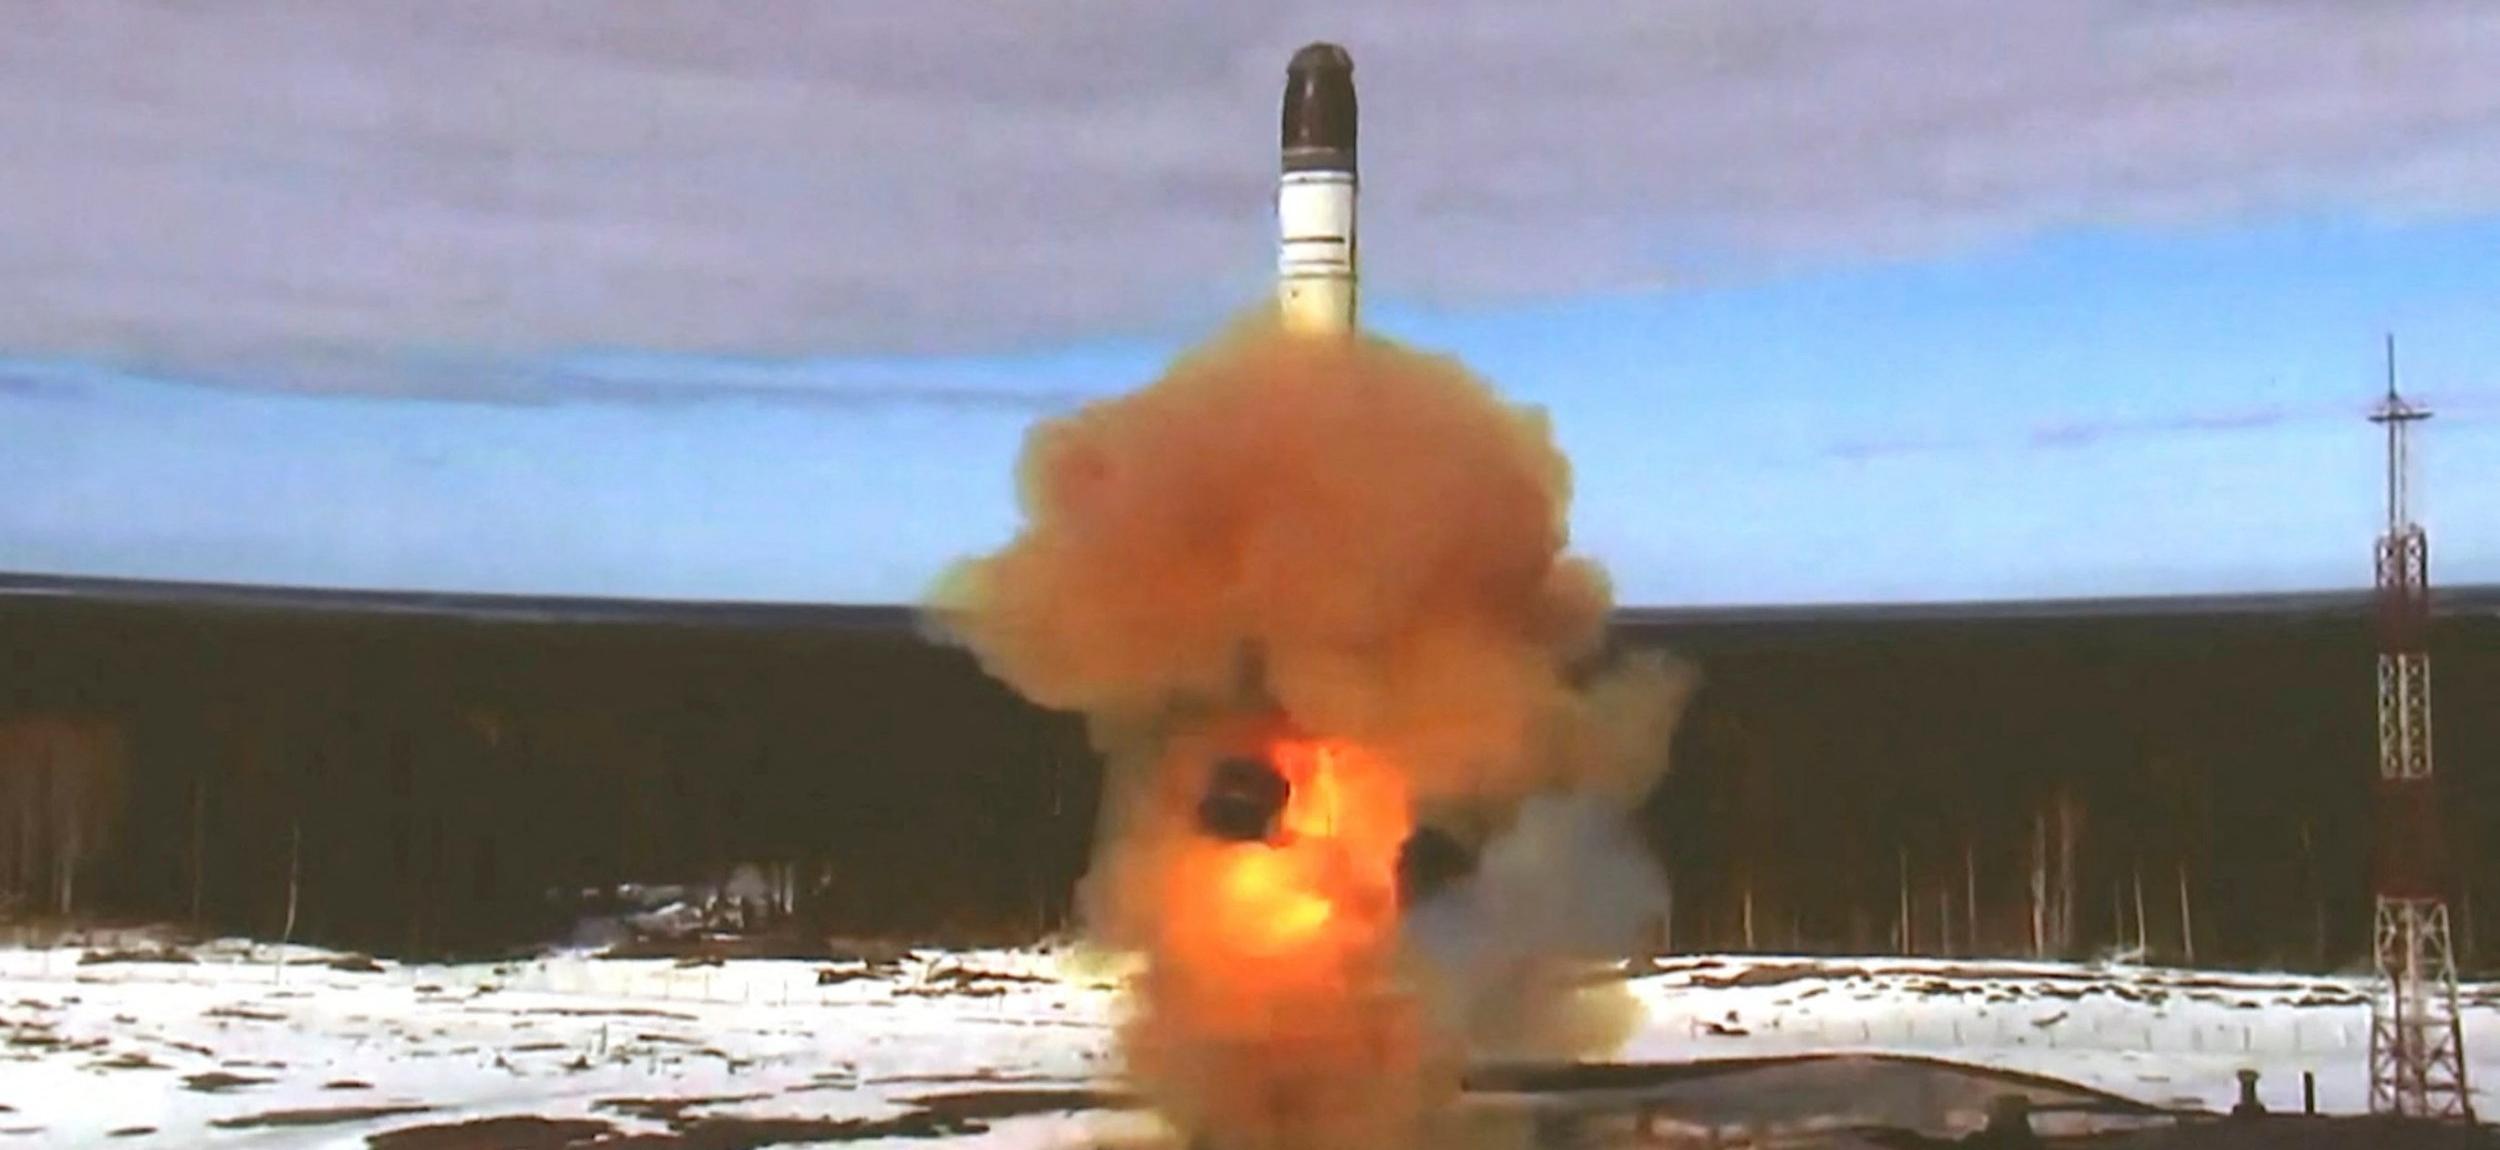 Russia test-fired the “RS-28 SARMAT,” world’s “most powerful” nuclear-capable intercontinental ballistic missile